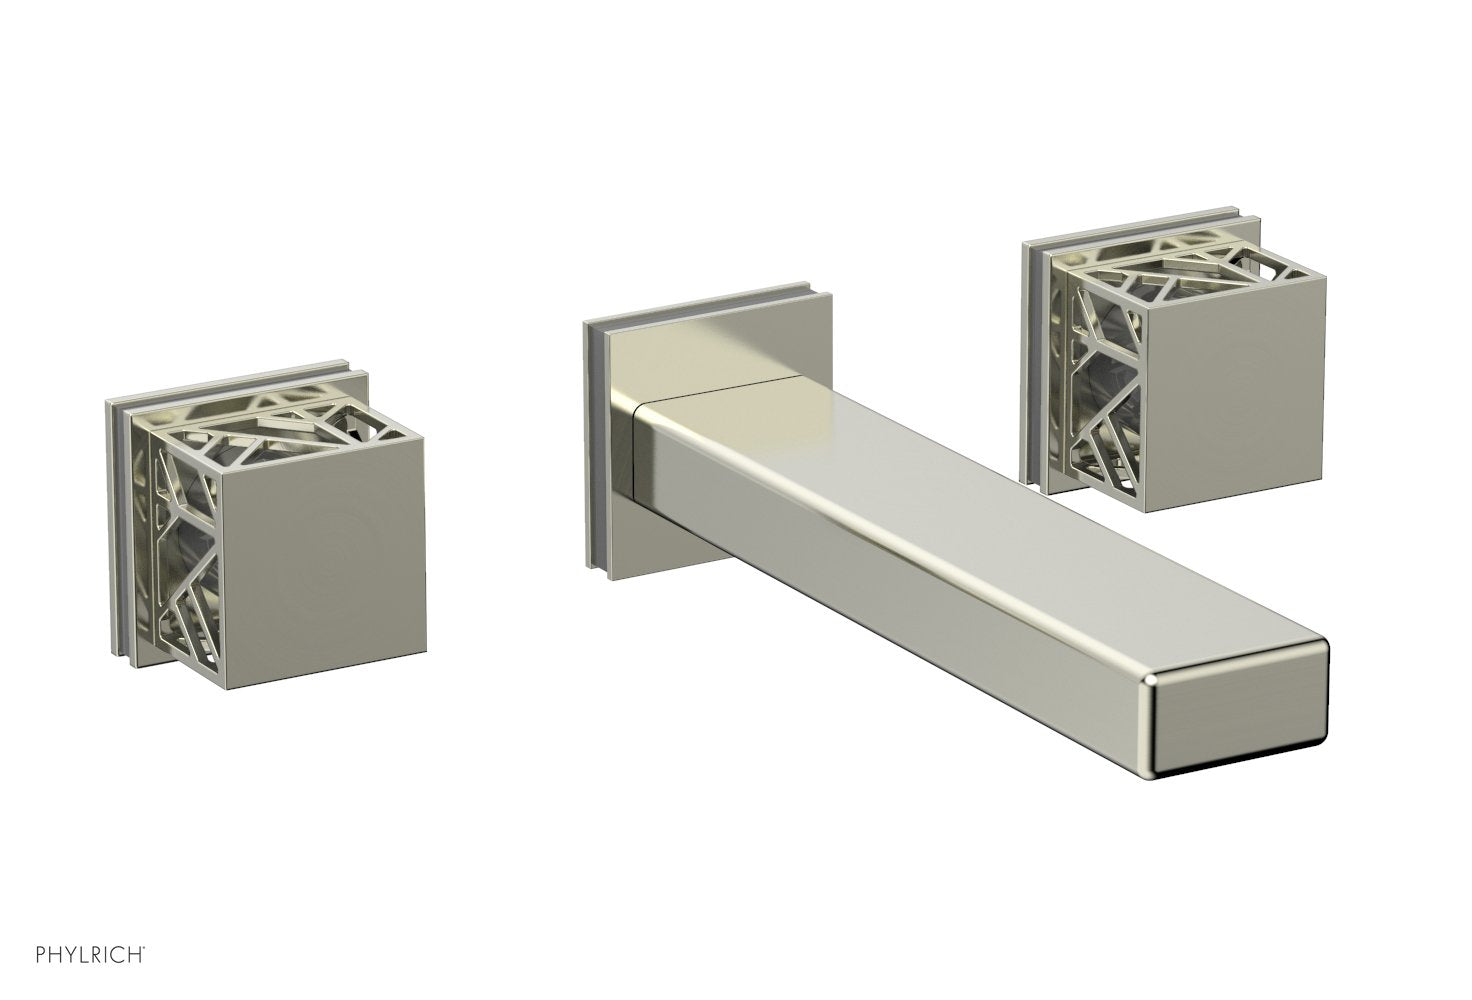 Phylrich JOLIE Wall Lavatory Set - Square Handles with "Grey" Accents